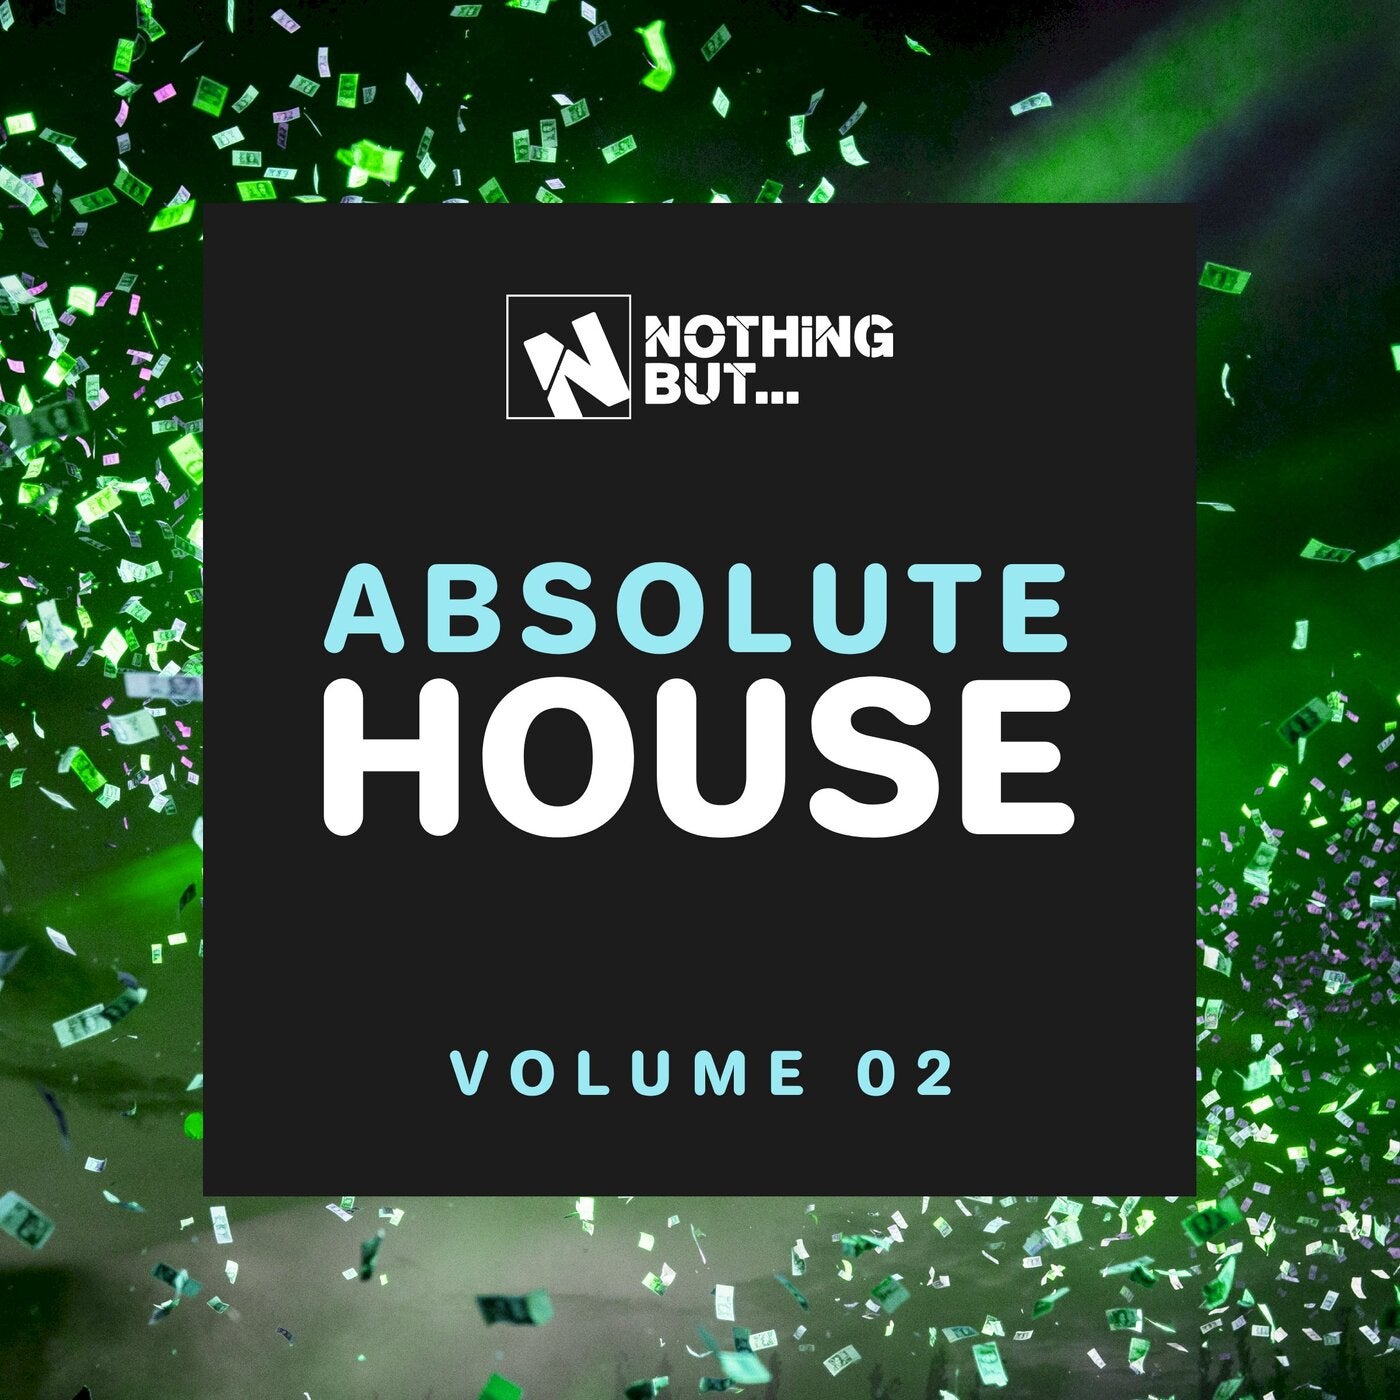 VA – Nothing But… Absolute House, Vol. 02 [NBABHS02]